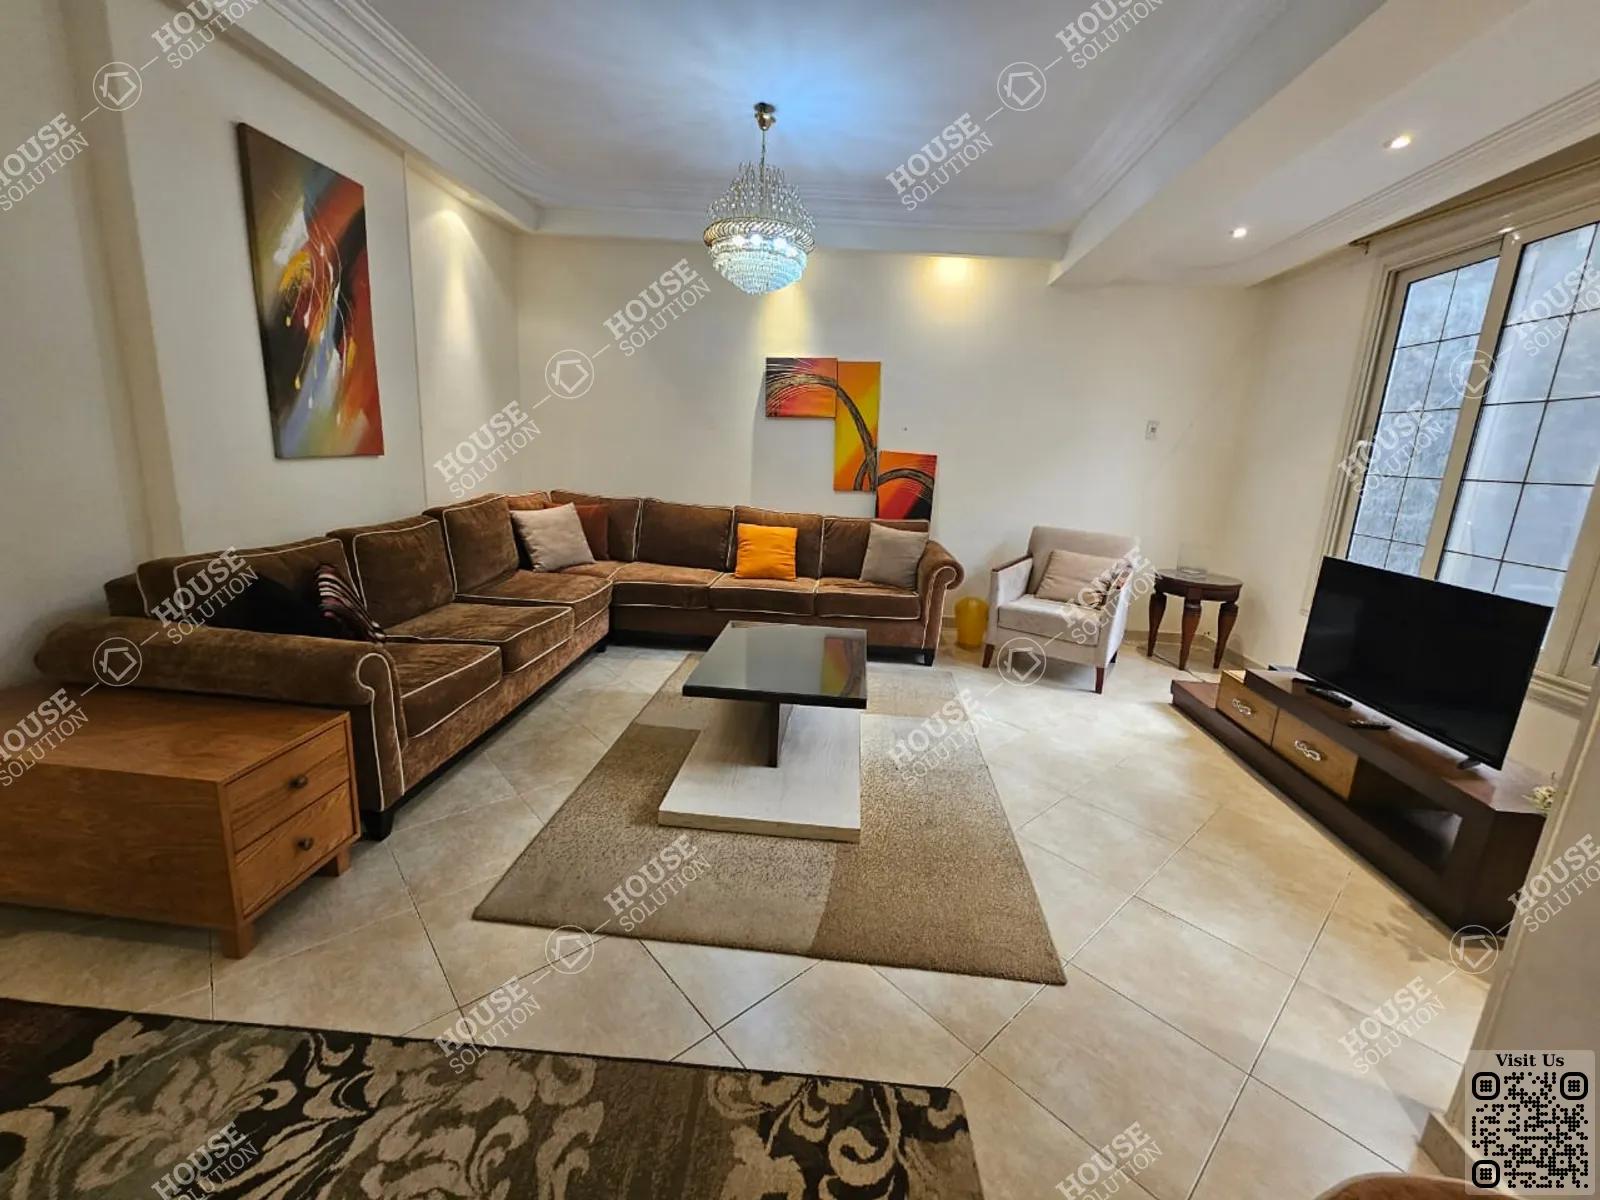 RECEPTION  @ Apartments For Rent In Maadi Maadi Degla Area: 180 m² consists of 3 Bedrooms 3 Bathrooms Furnished 5 stars #4968-1